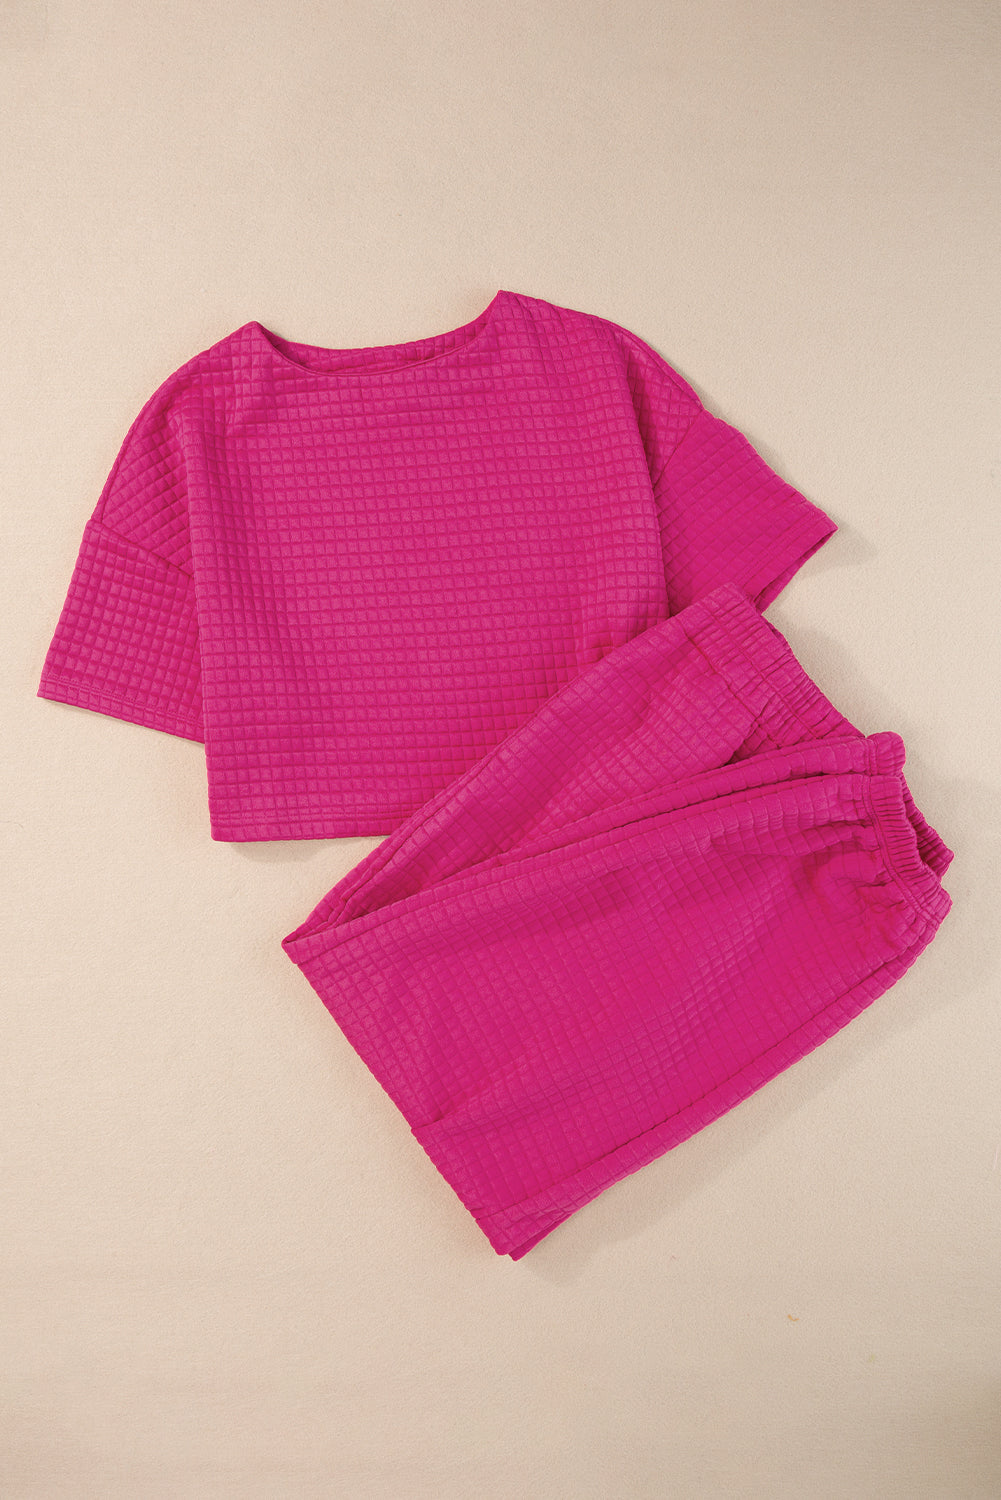 Blue Zone Planet |  Rose Red Lattice Textured Cropped Tee and Jogger Pants Set Blue Zone Planet